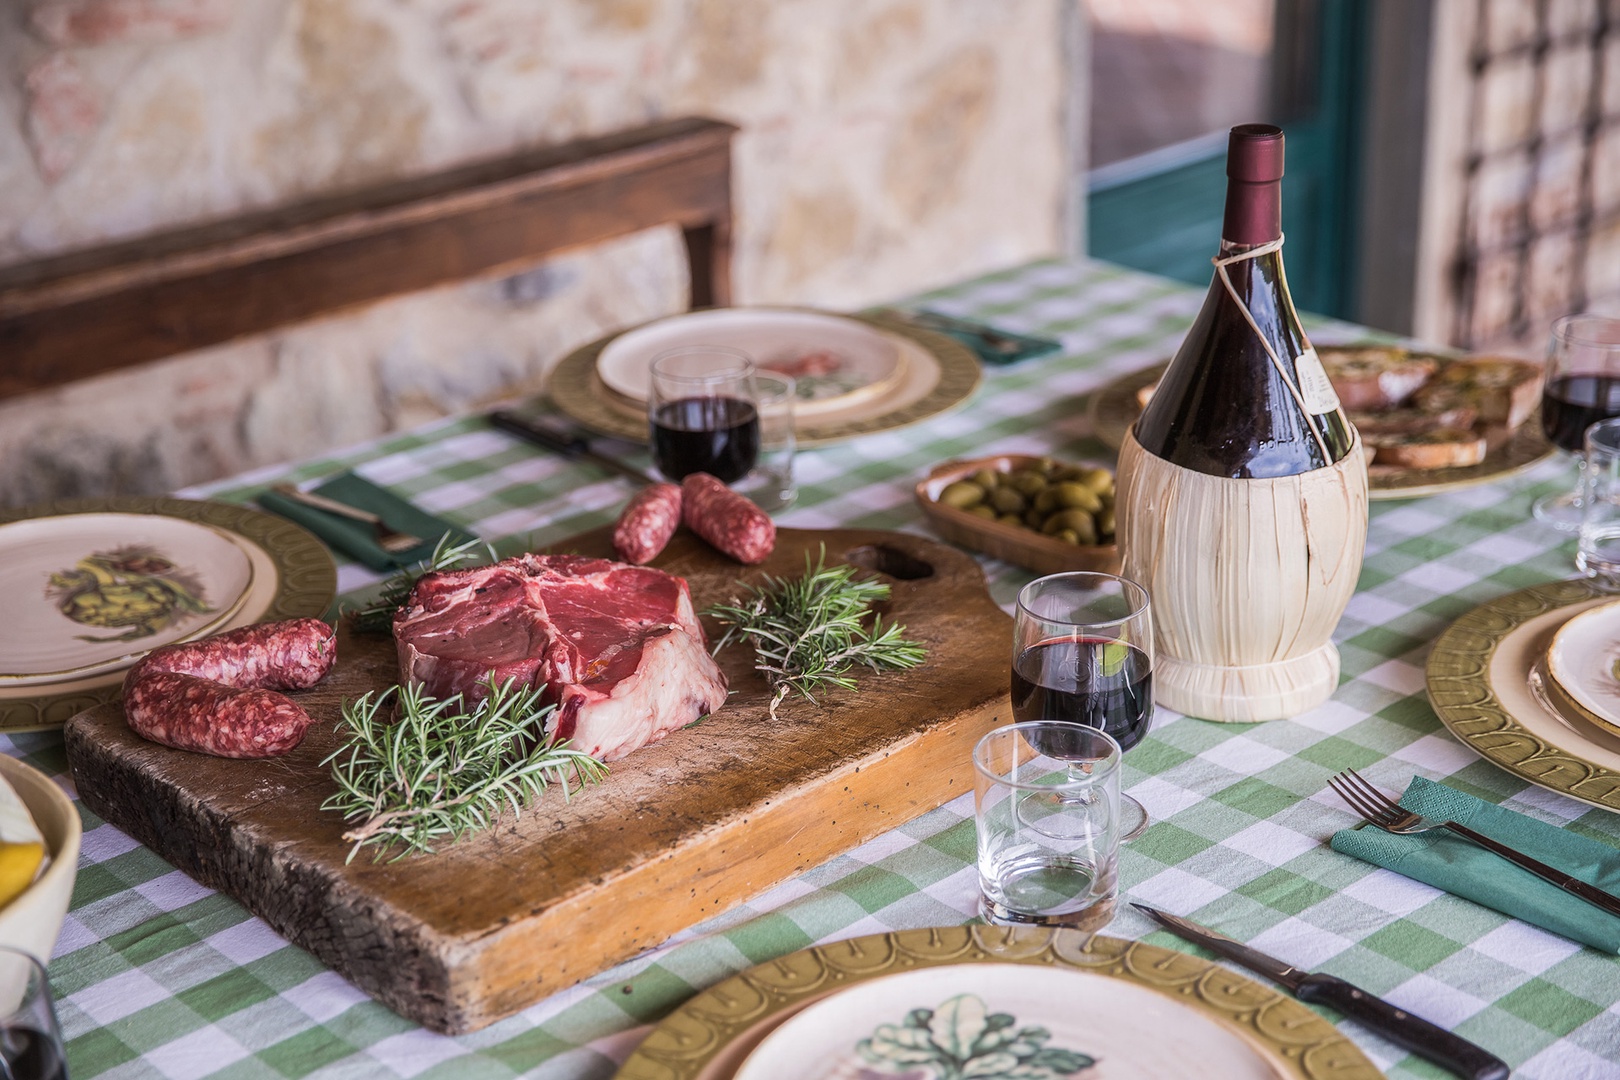 Tuscany is famous for Chianina beef, one of the oldest breeds of cattle in the world.